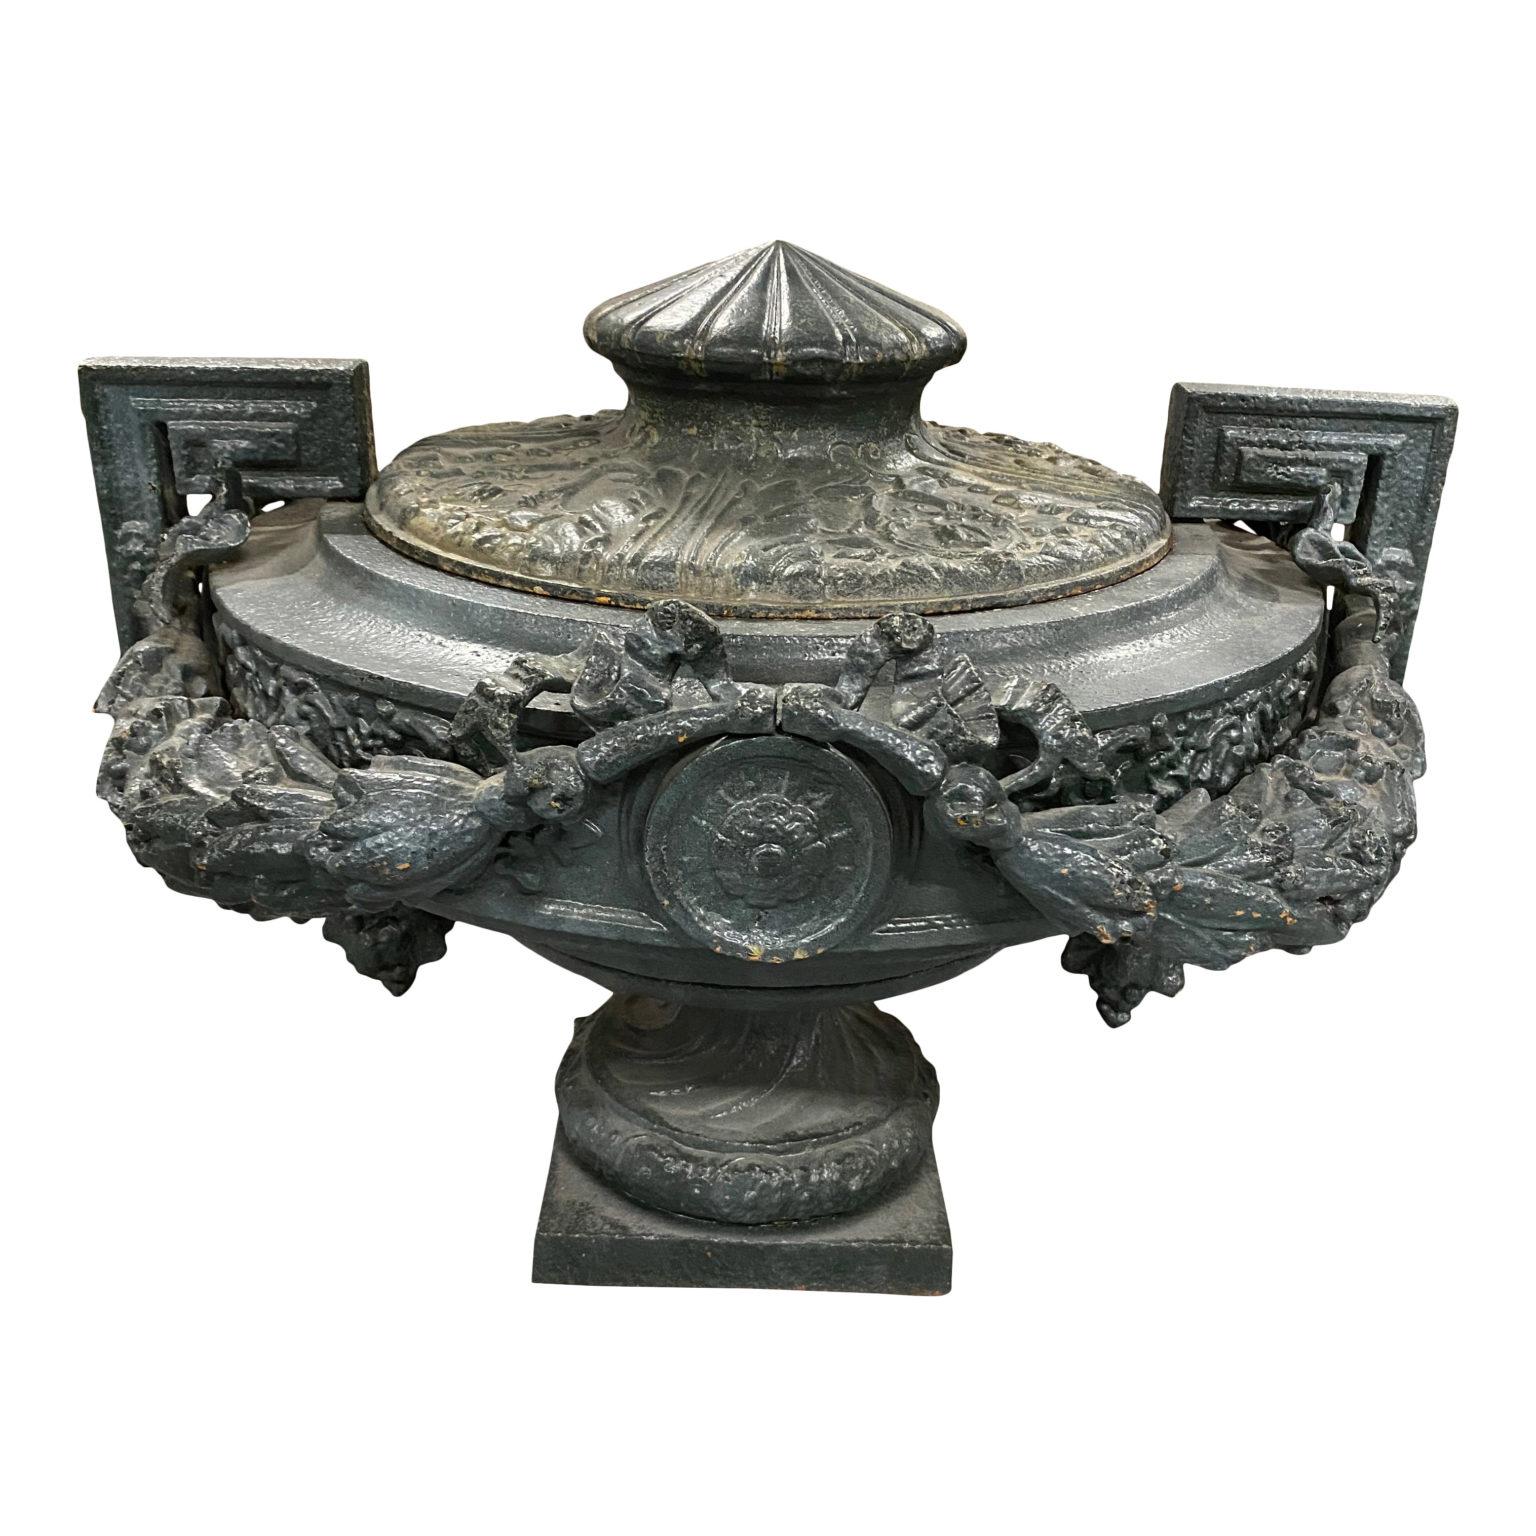 Rare 19th century cast iron green urn with large garlands around rim, greek key handles, and lid

19 H, 25 OAD, 8.25? Square Base.

.